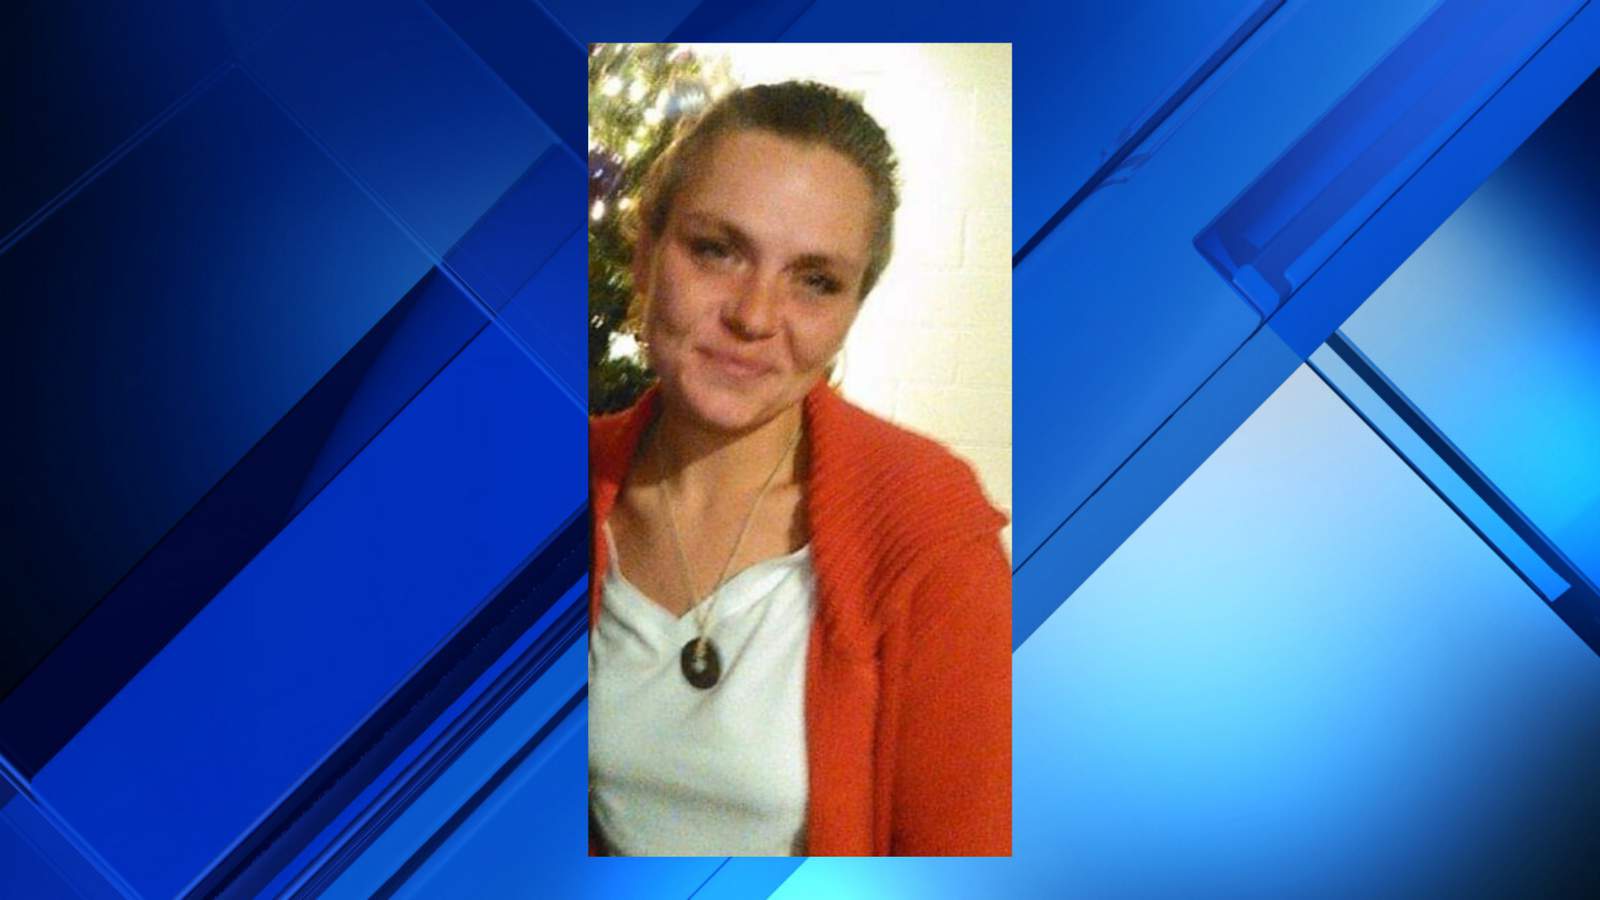 Crime Stoppers offers $2,500 reward for help locating missing 42-year-old Detroit woman